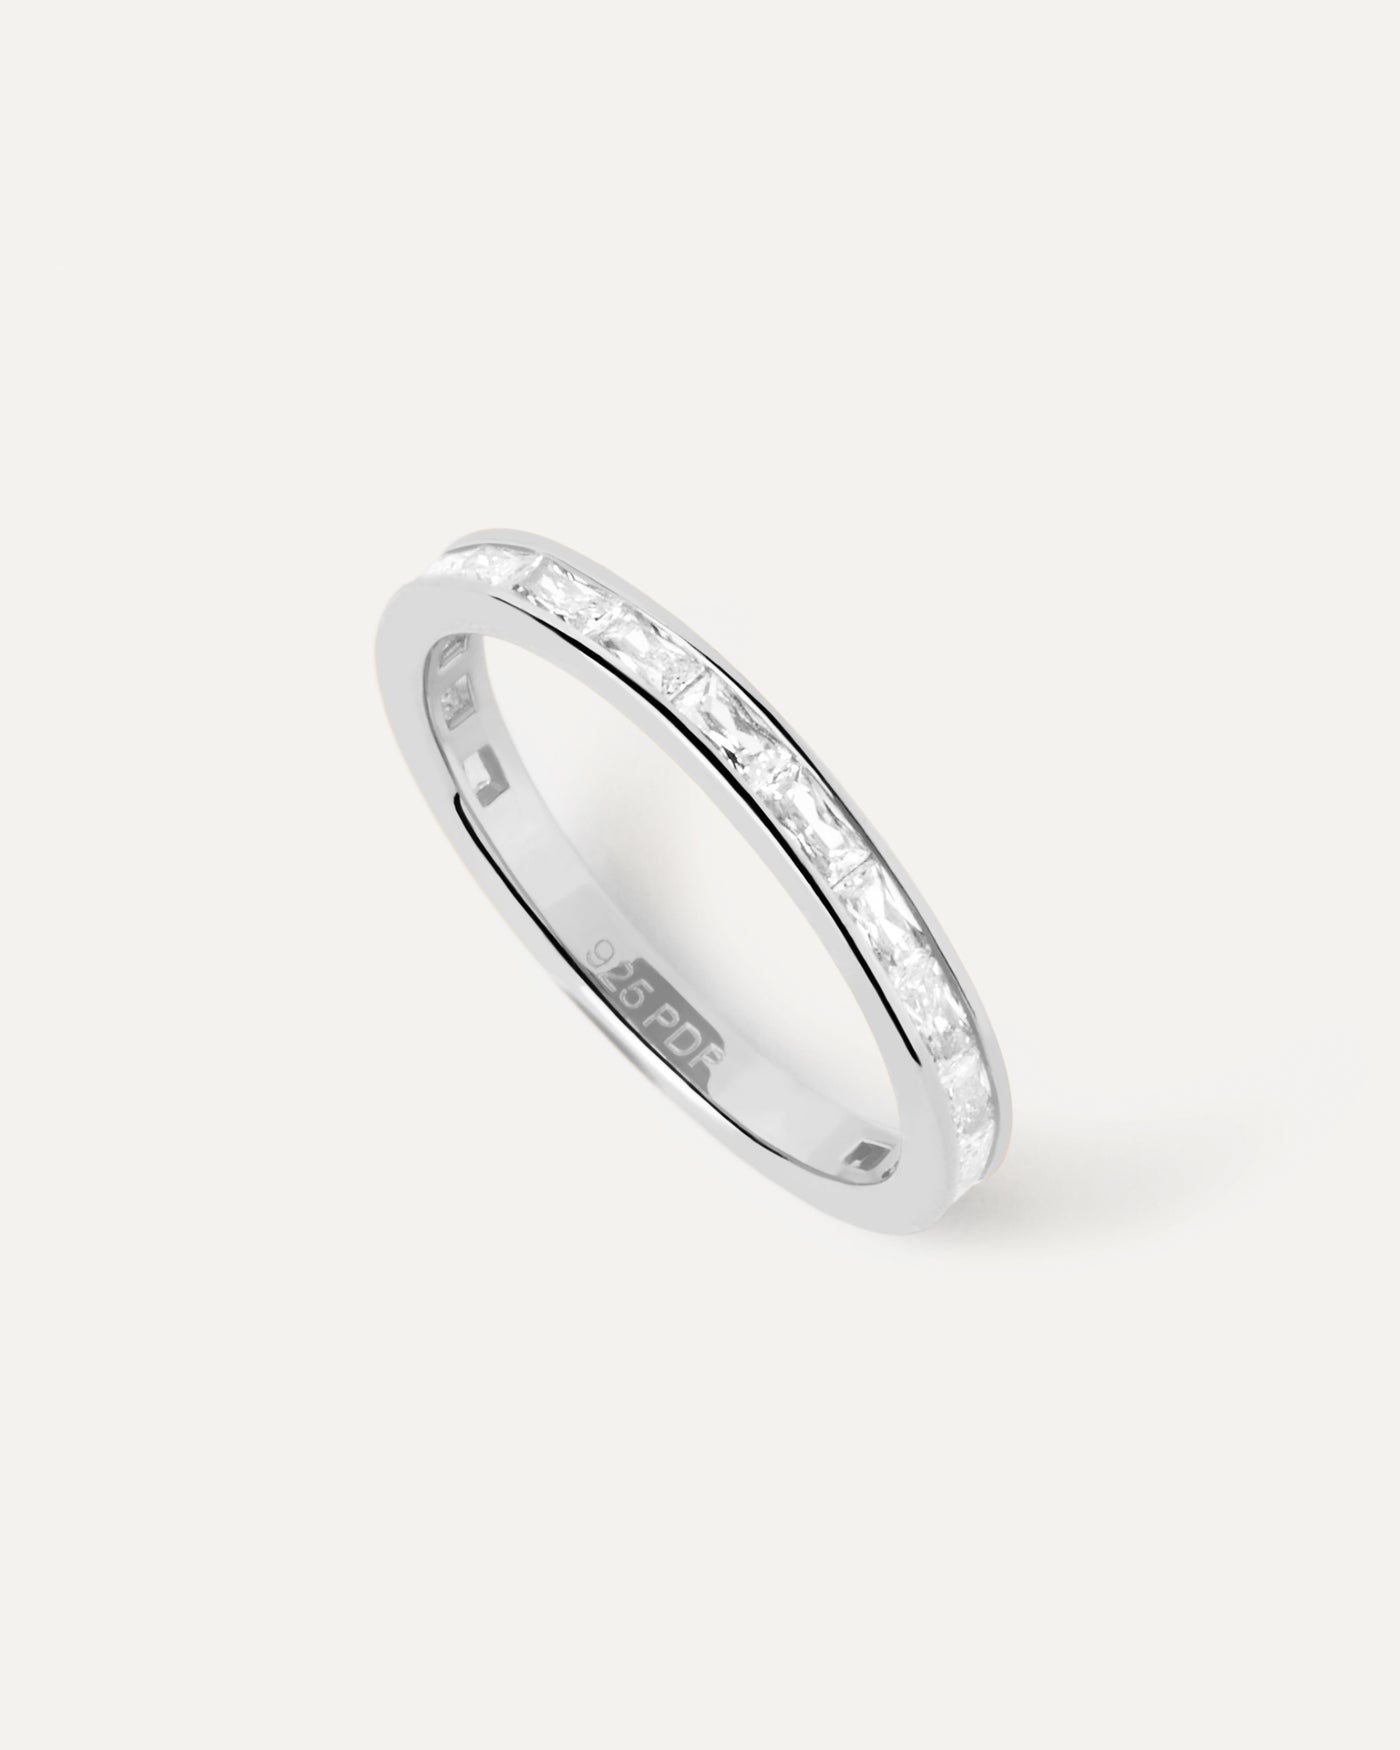 2023 Selection | Viena Silver Ring. Silver eternity ring set with rectangular cut white zirconia. Get the latest arrival from PDPAOLA. Place your order safely and get this Best Seller. Free Shipping.